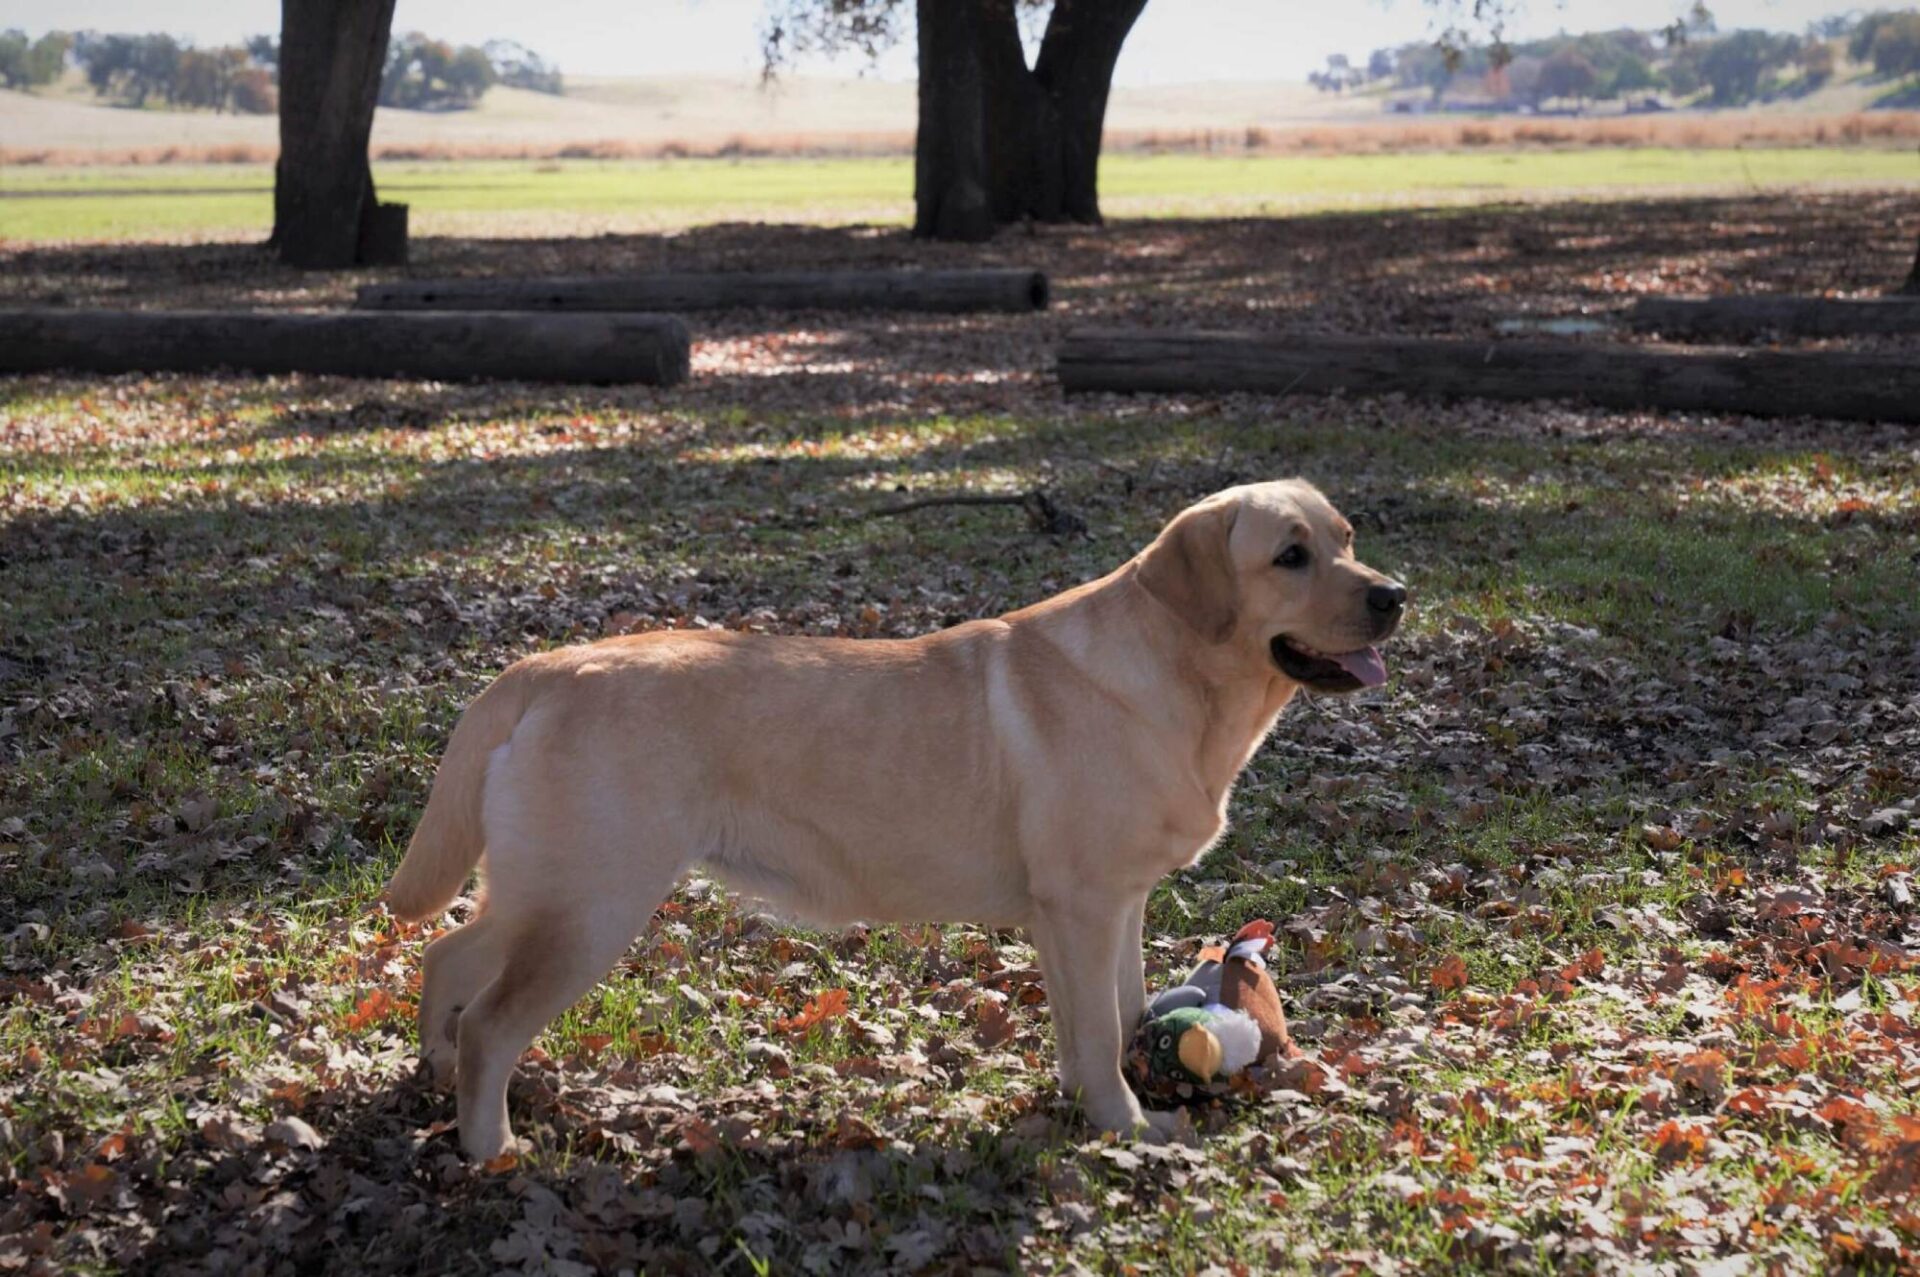 A dog standing in the grass with a ball.